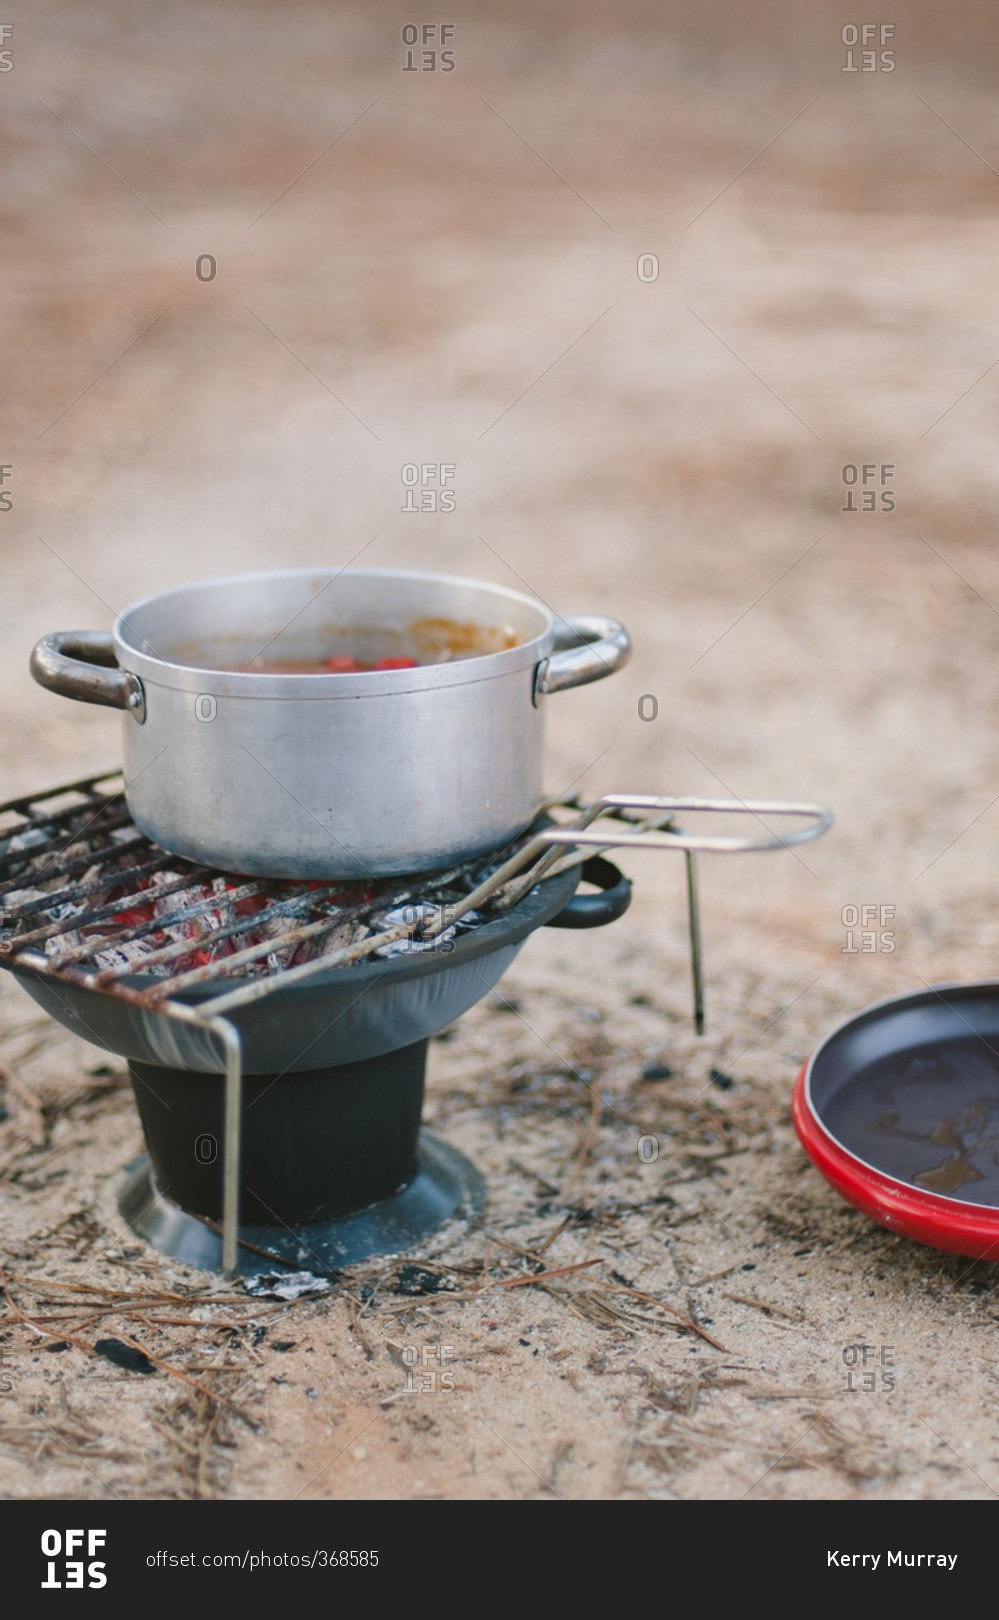 Pot cooking on camp stove